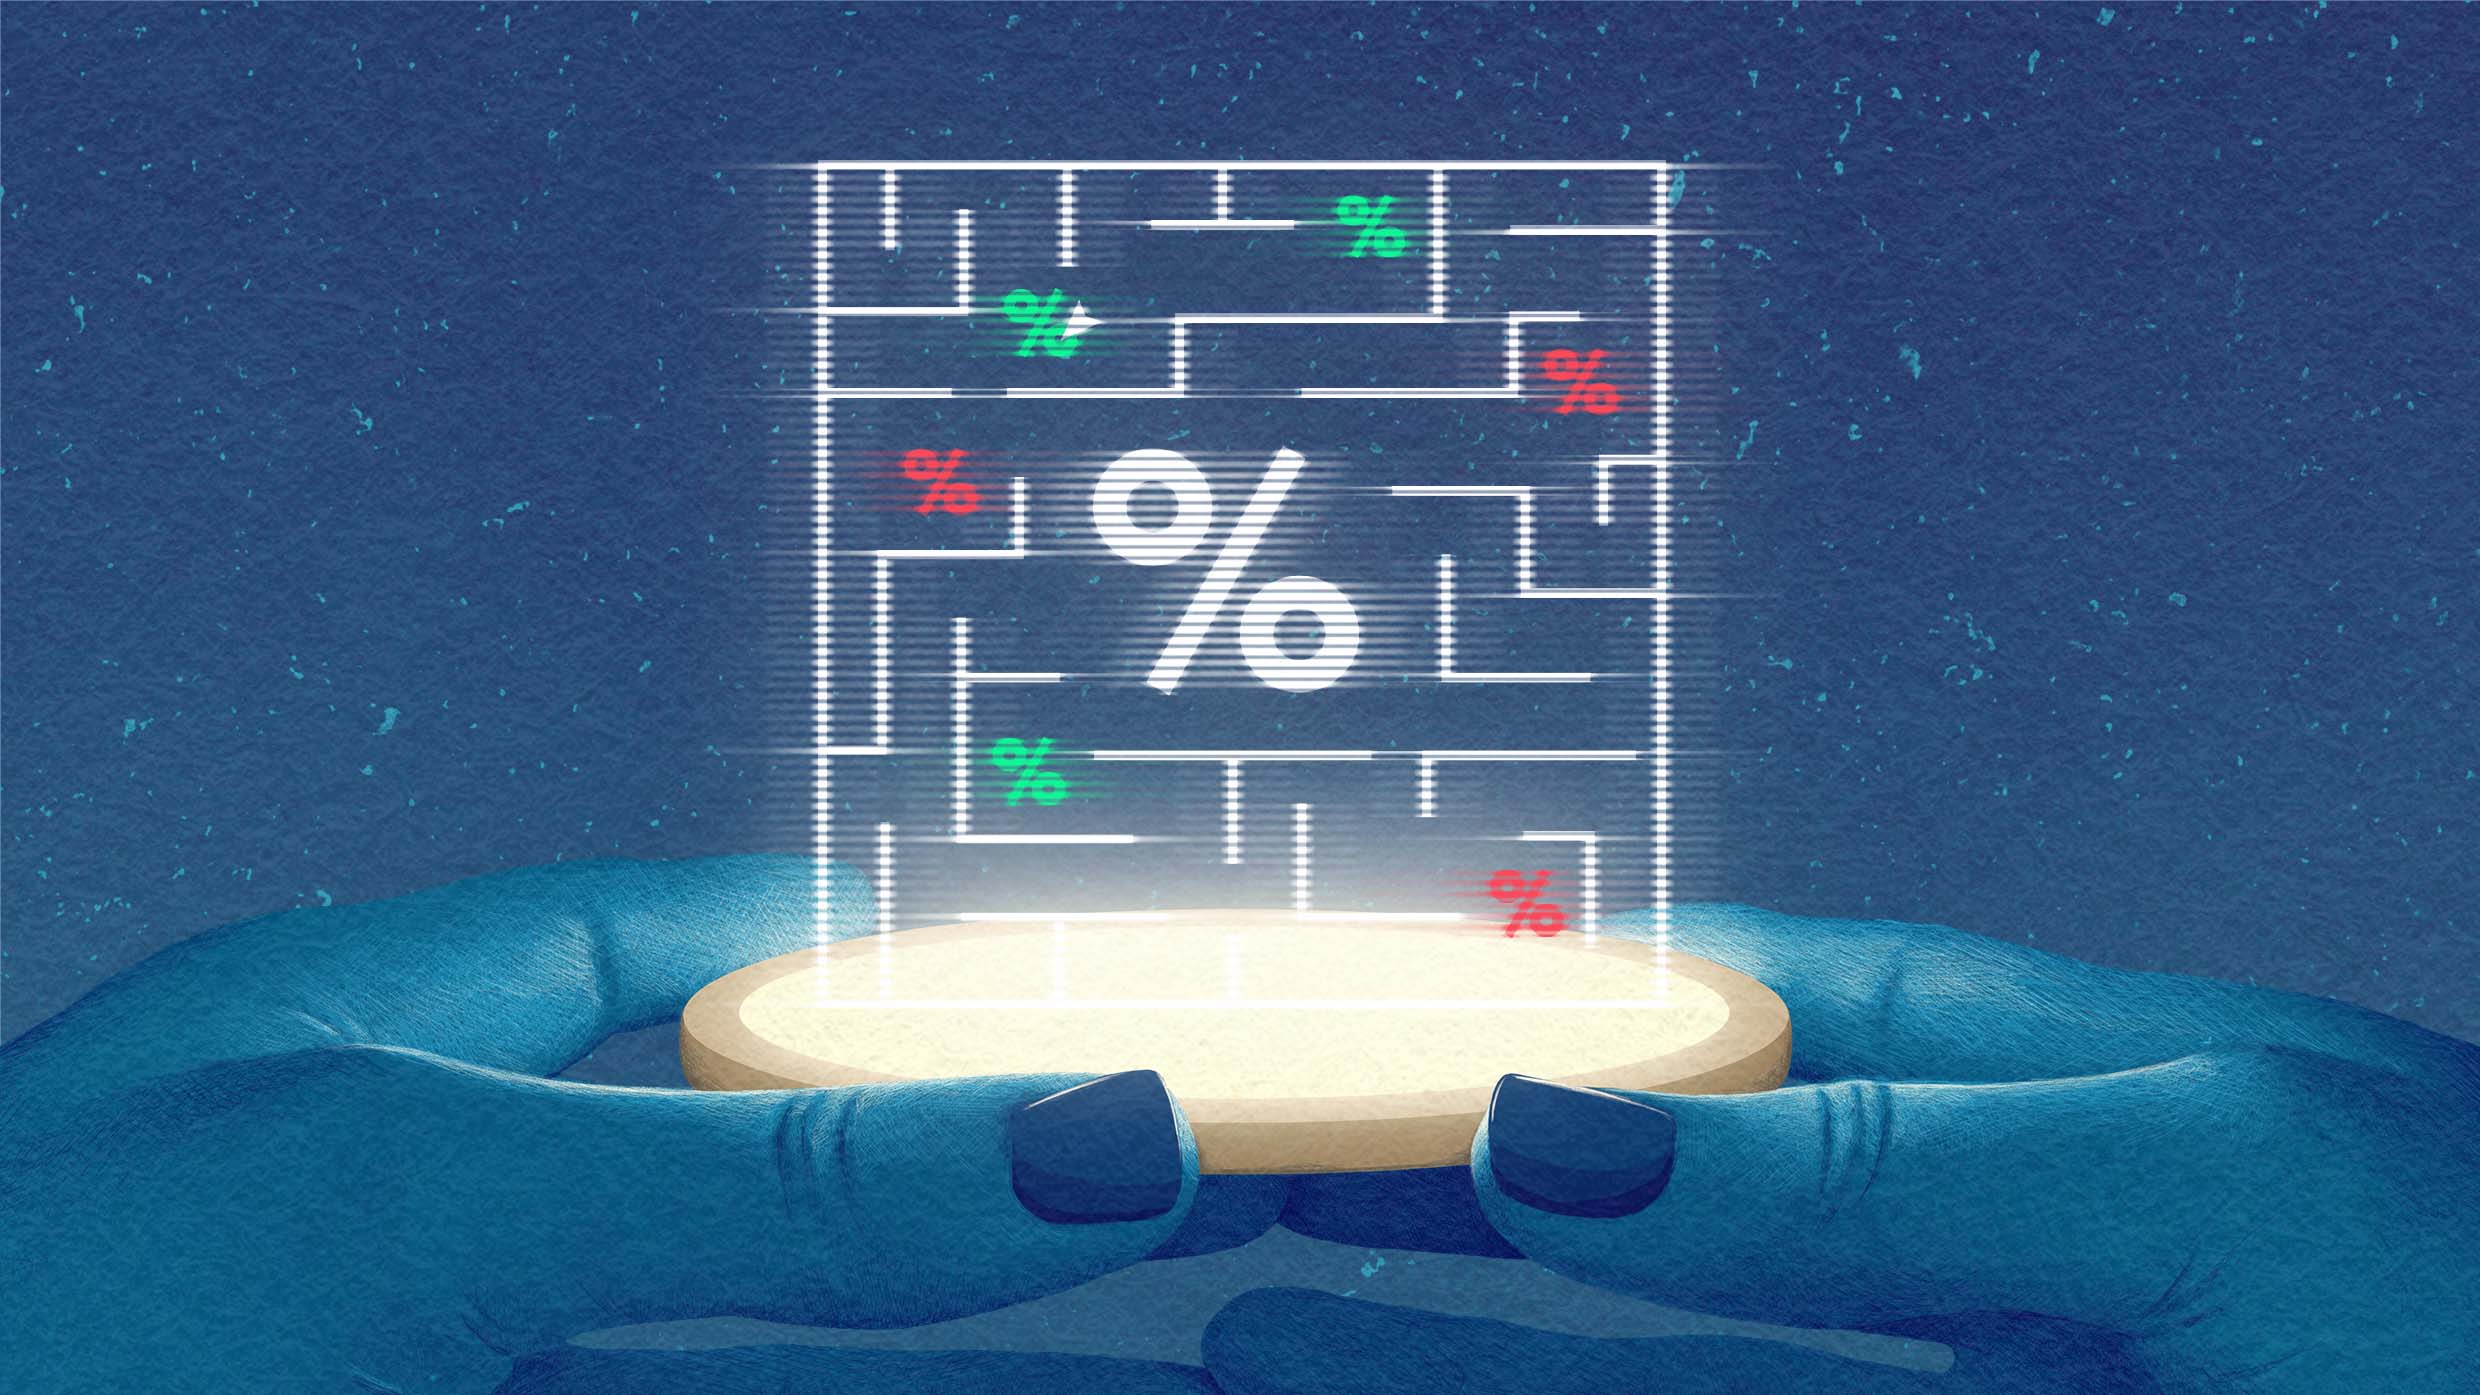 Illustration of a person holding a futuristic hologram. The game features a maze filled with green and red percent signs.